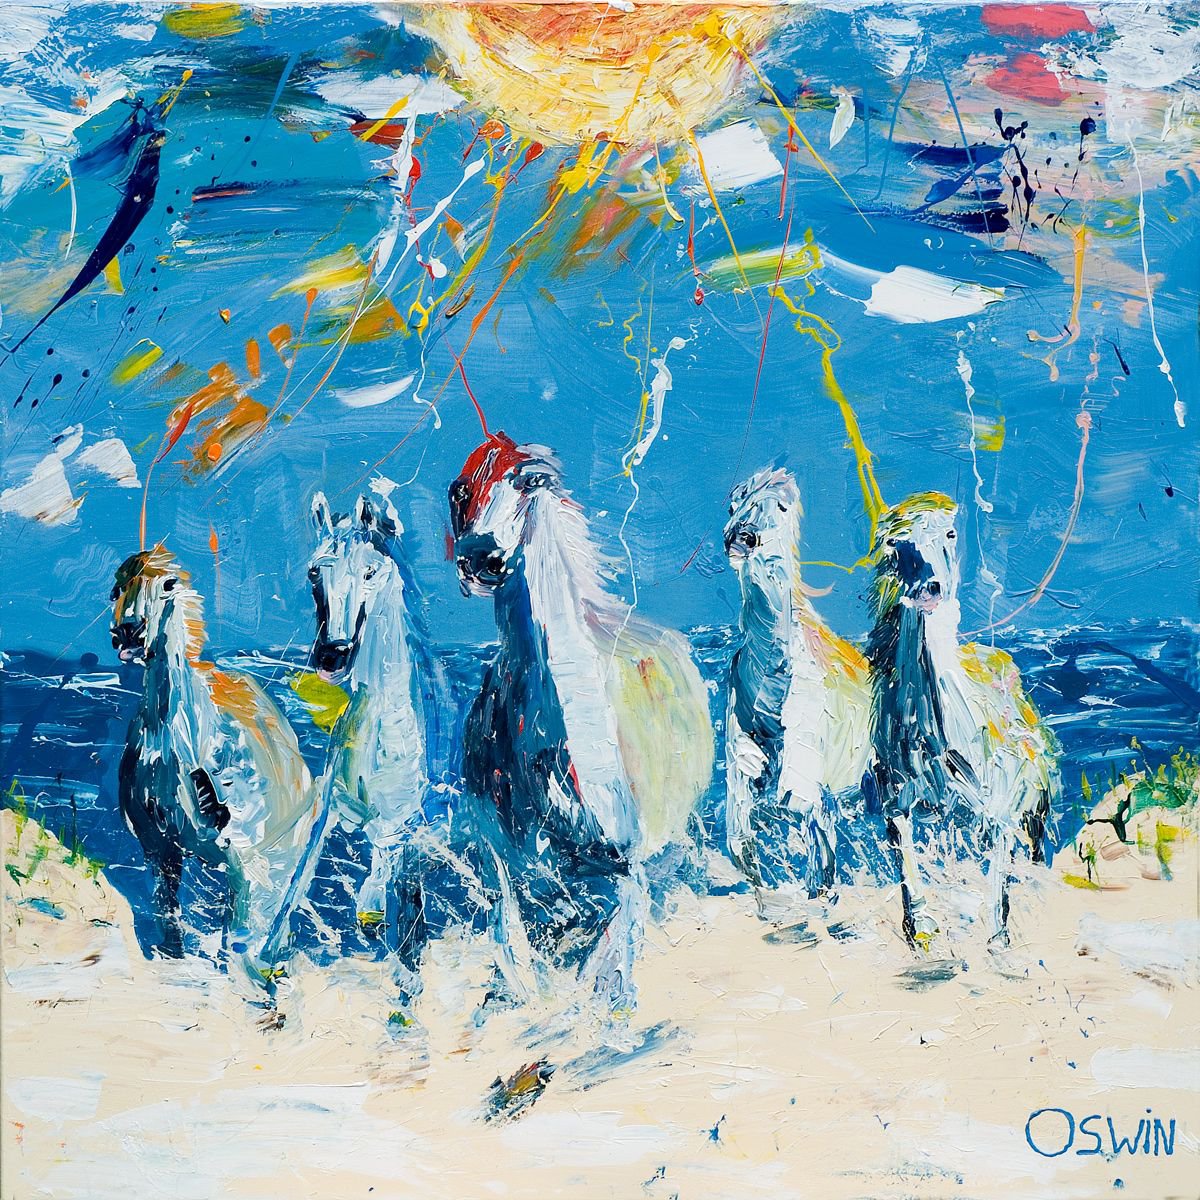 Horse painting - ON THE BEACH equine art 120 x 120 cm. 47.24x 47.24’ by Oswin Gesselli by Oswin Gesselli